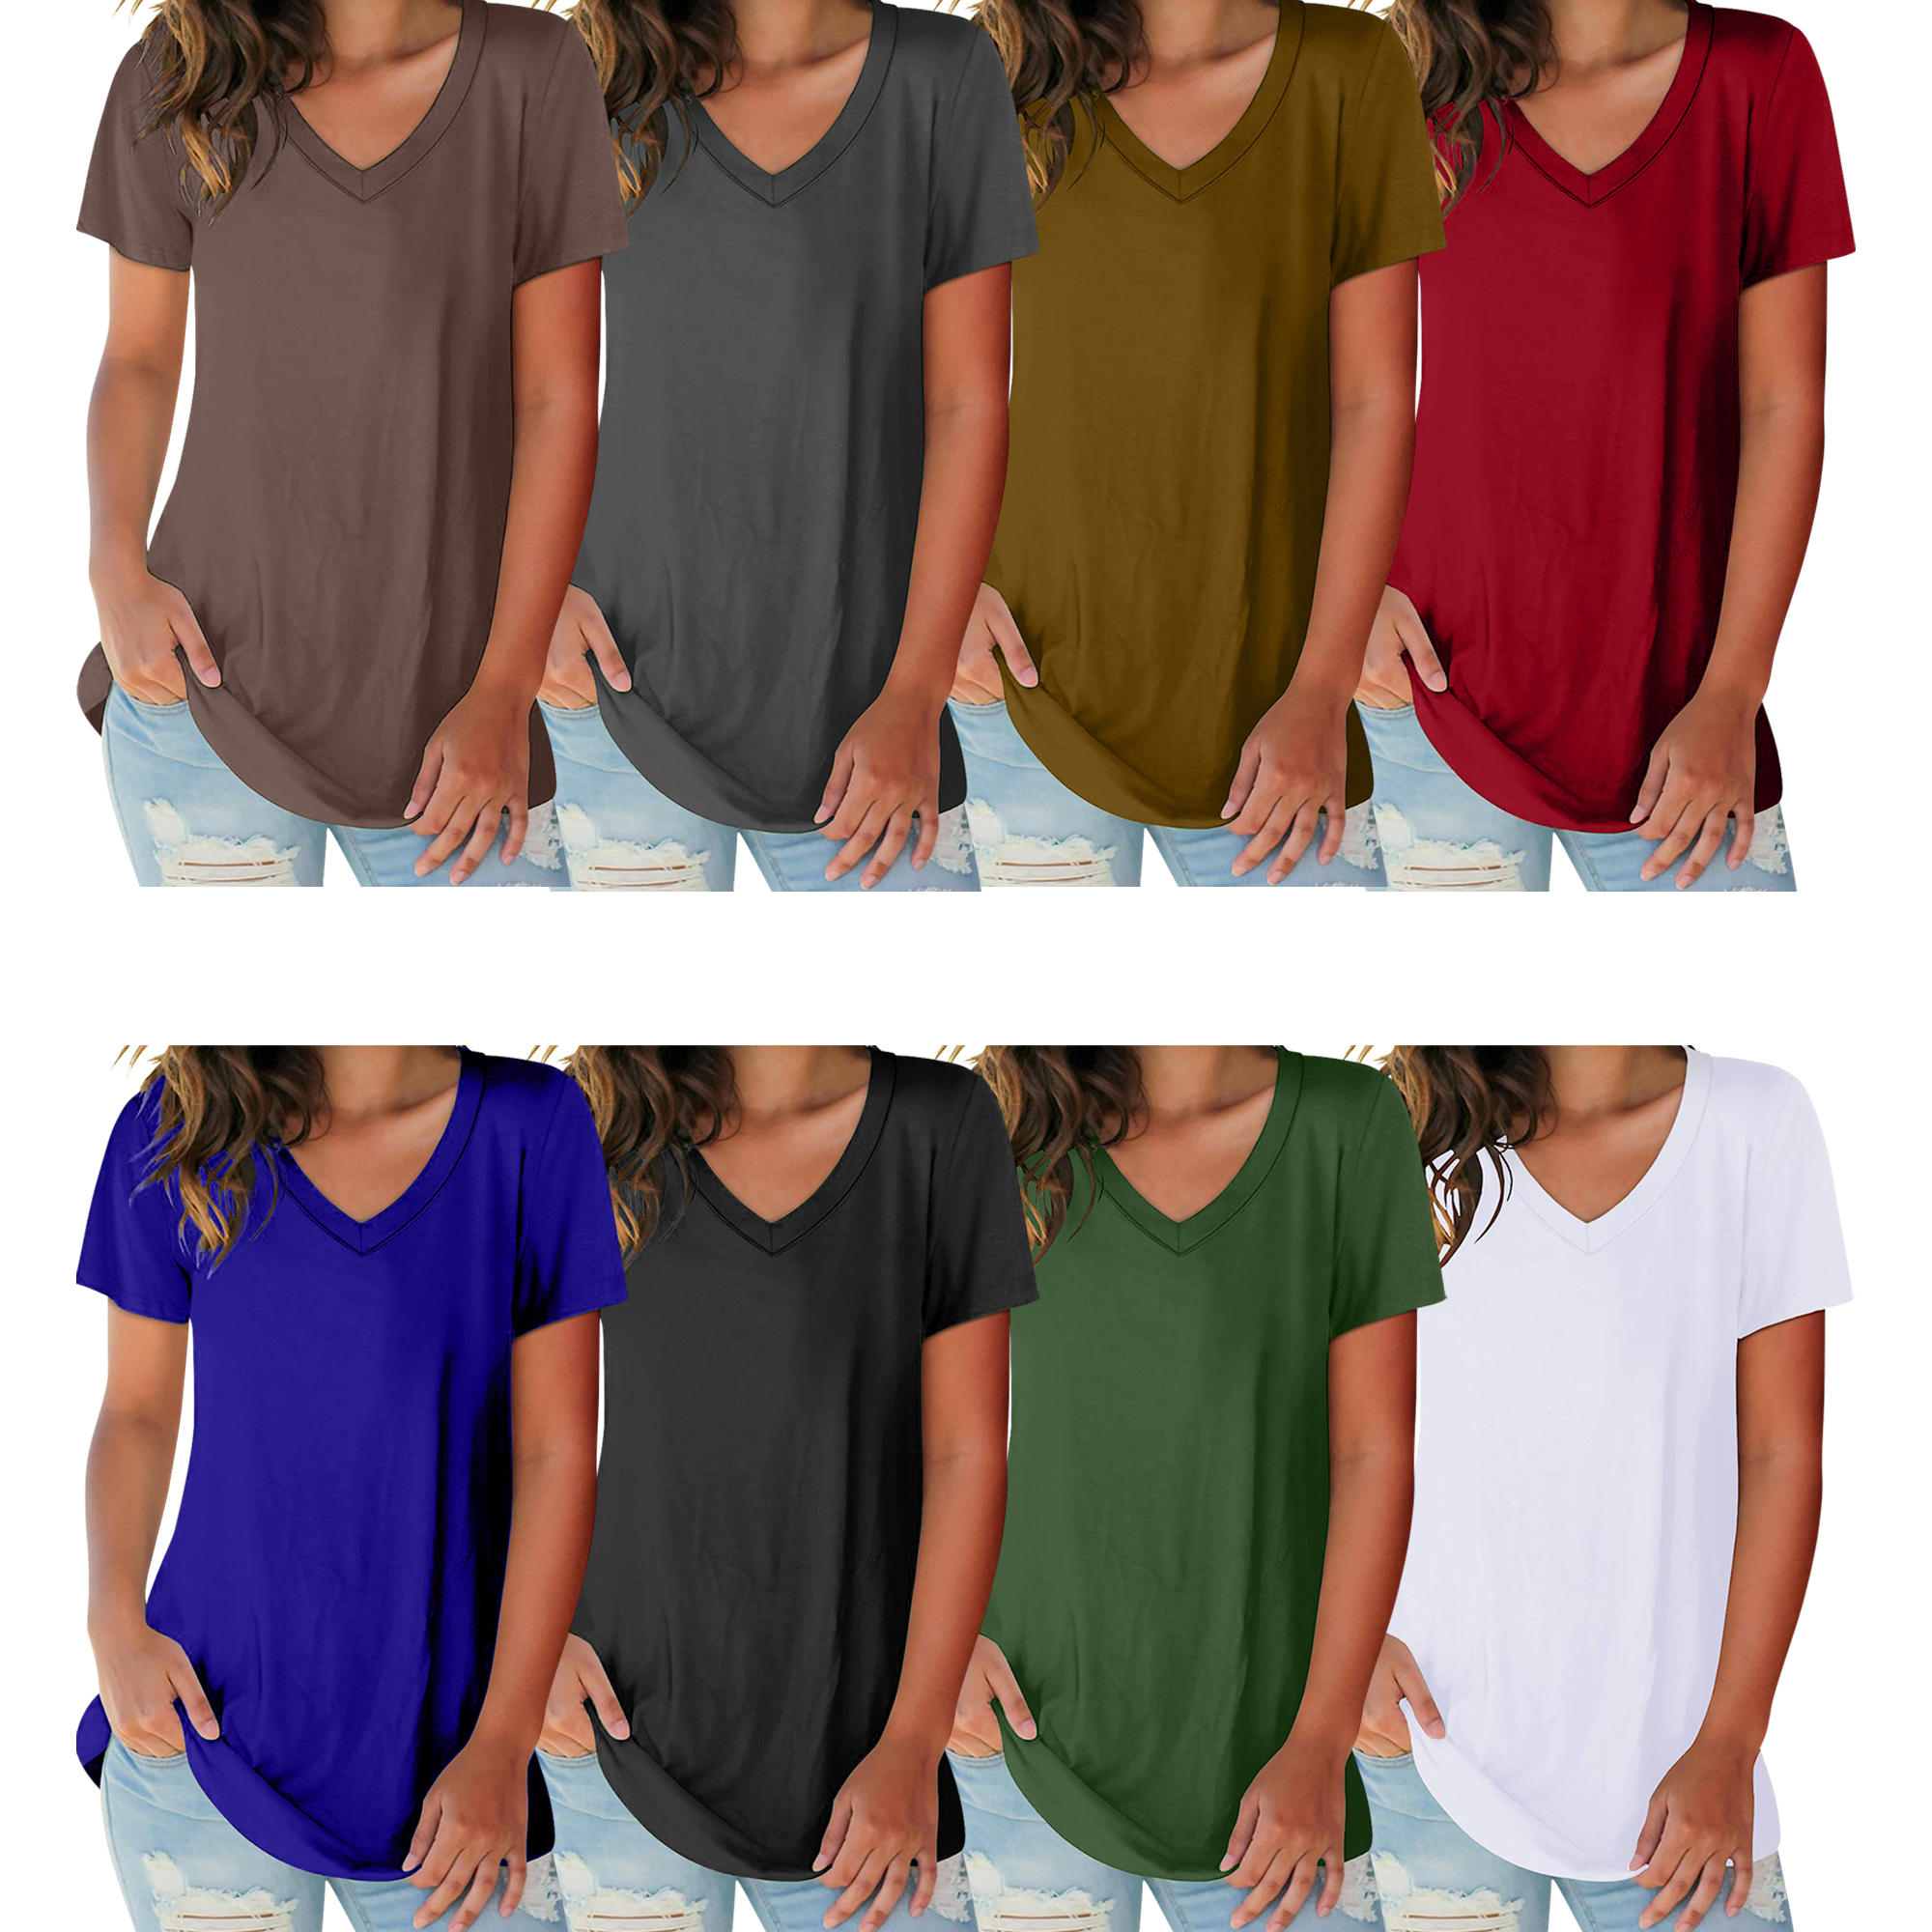 3-Pack Women's Solid V- Neck T-Shirts Soft Stretchy Athletic Moisture-Wicking Running Workout Yoga Tee Tops - L